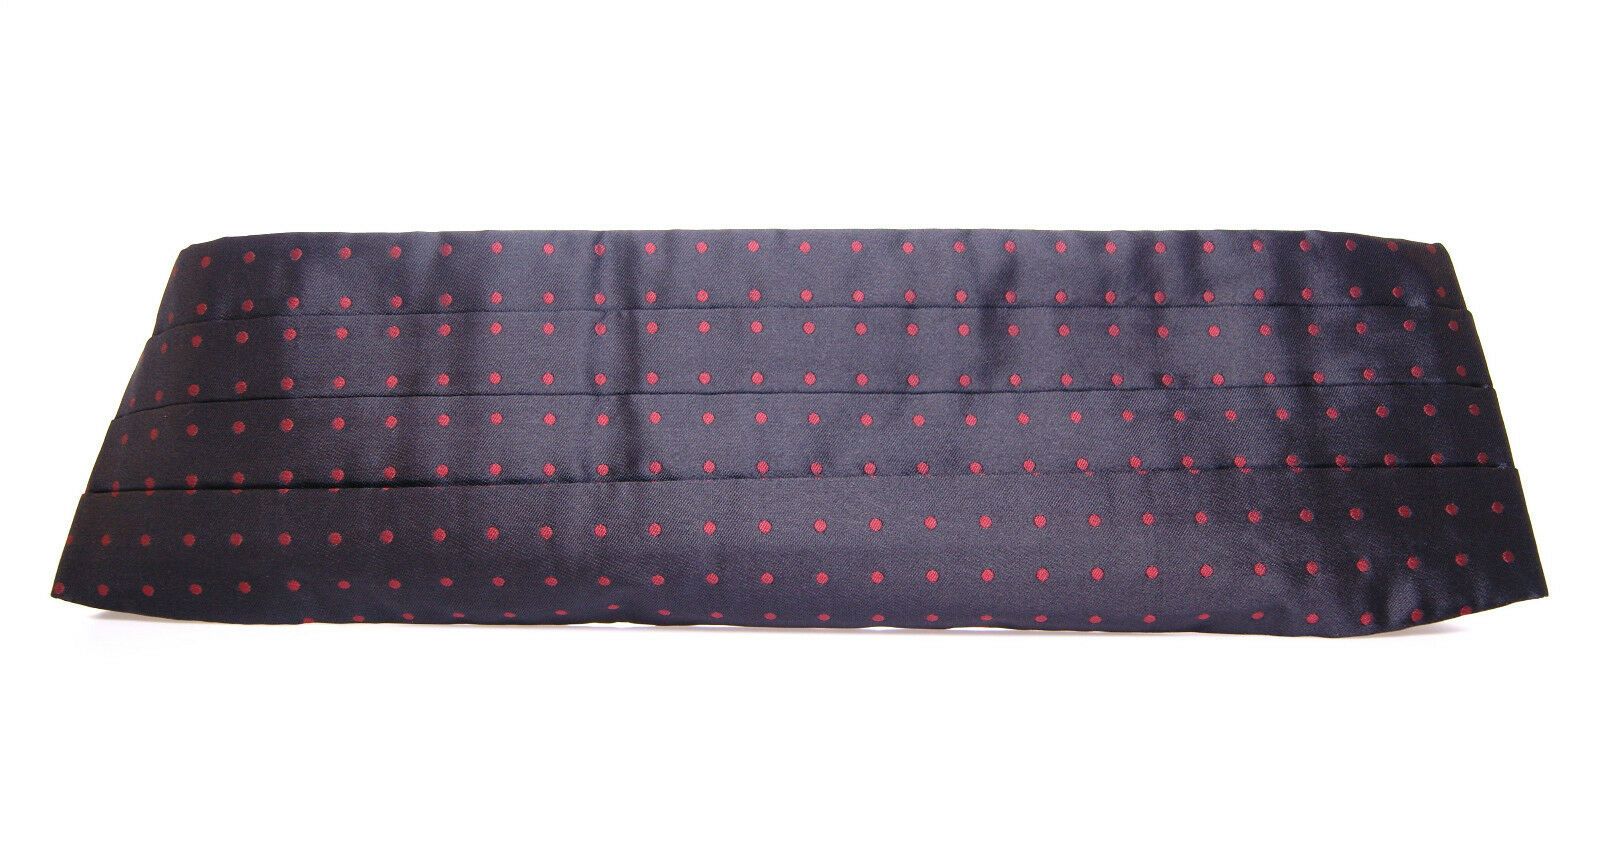 Black Waist Tuxedo Smoking Belt Cummerbund - Designed by Dolce & Gabbana Available to Buy at a Discounted Price on Moon Behind The Hill Online Designer Discount Store